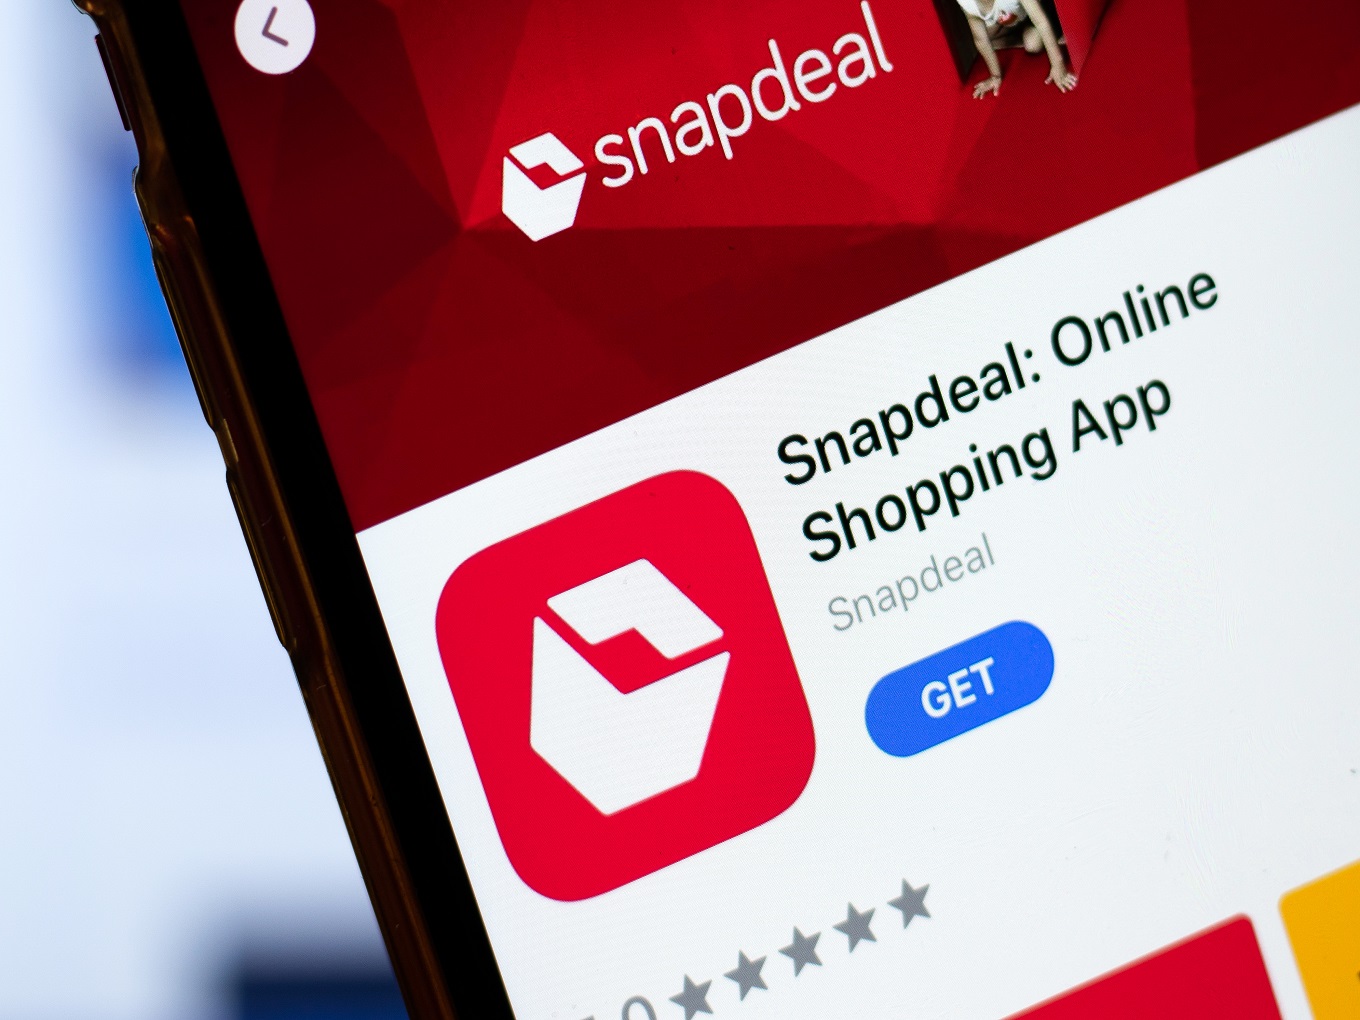 Ecommerce Platform Snapdeal Eyes For $400 Mn IPO: Report